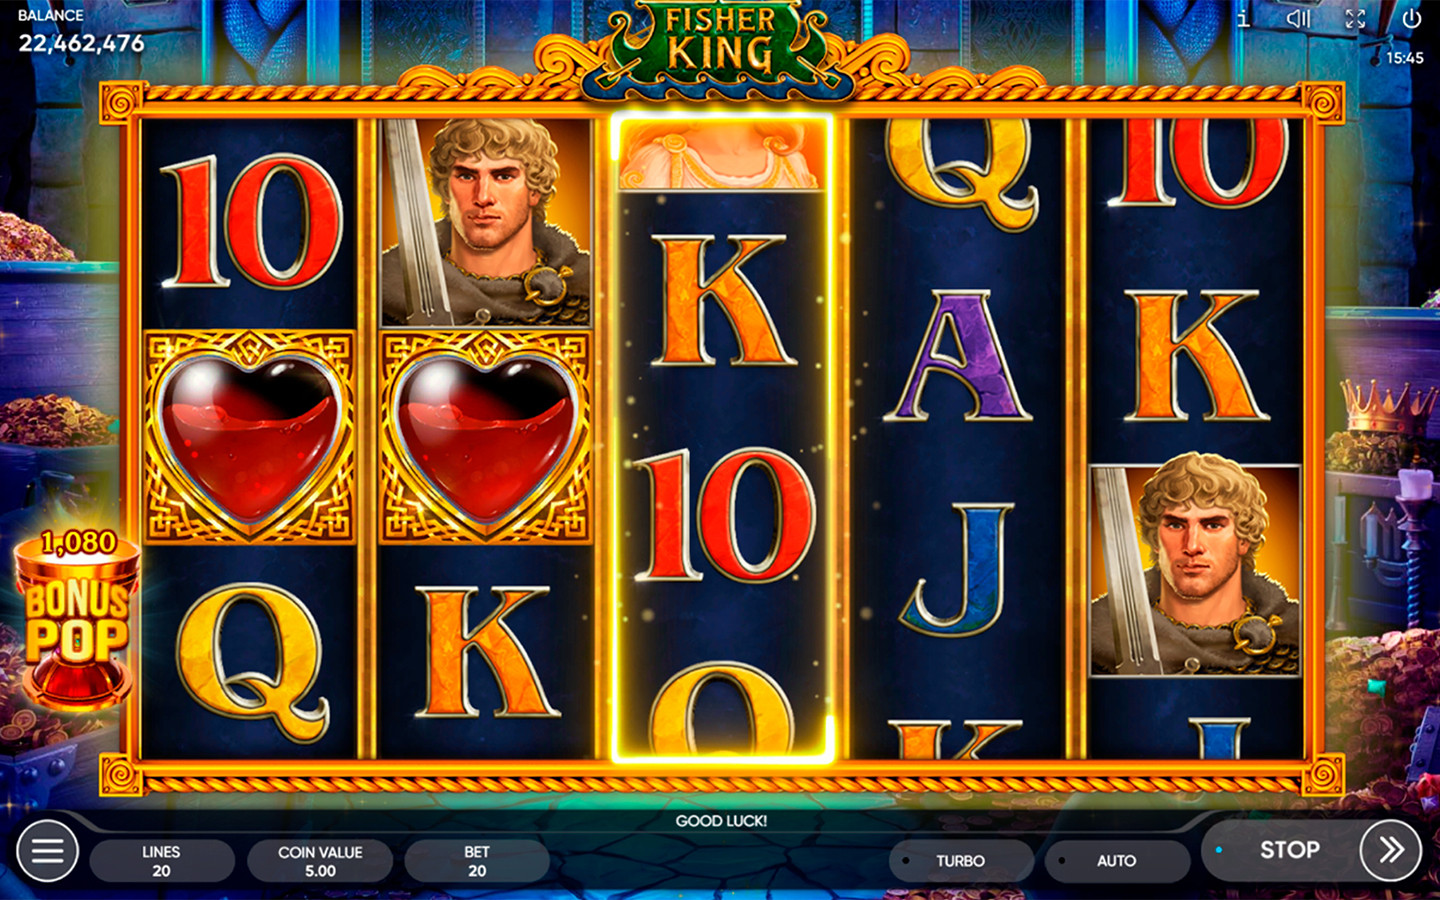 TOP 2022 SLOT GAMES | Play Fisher King slot now!